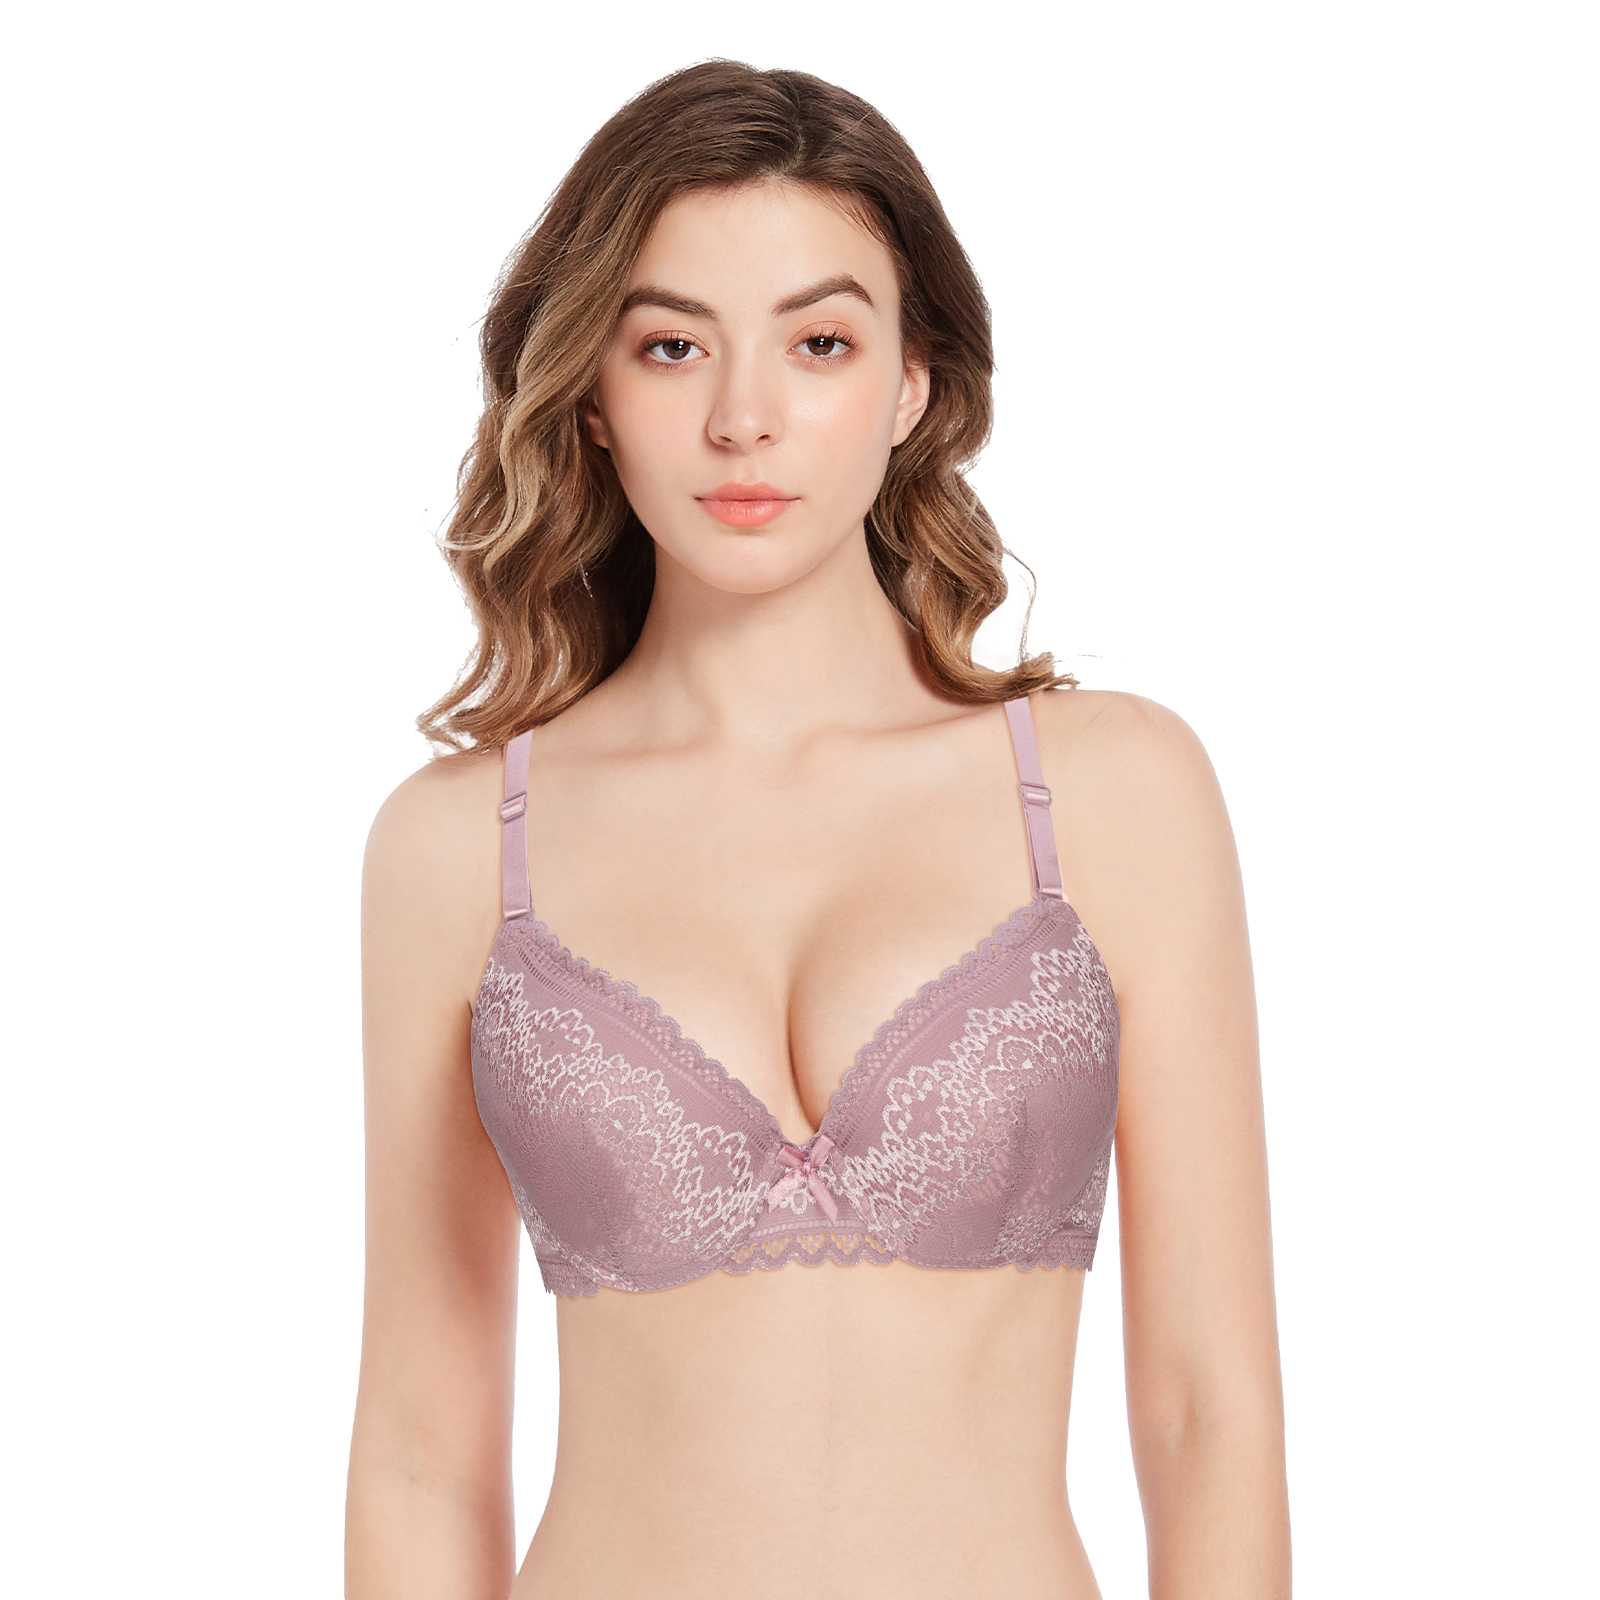 34C Bras for Women Underwire Push Up Lace Bra Pack Padded Contour